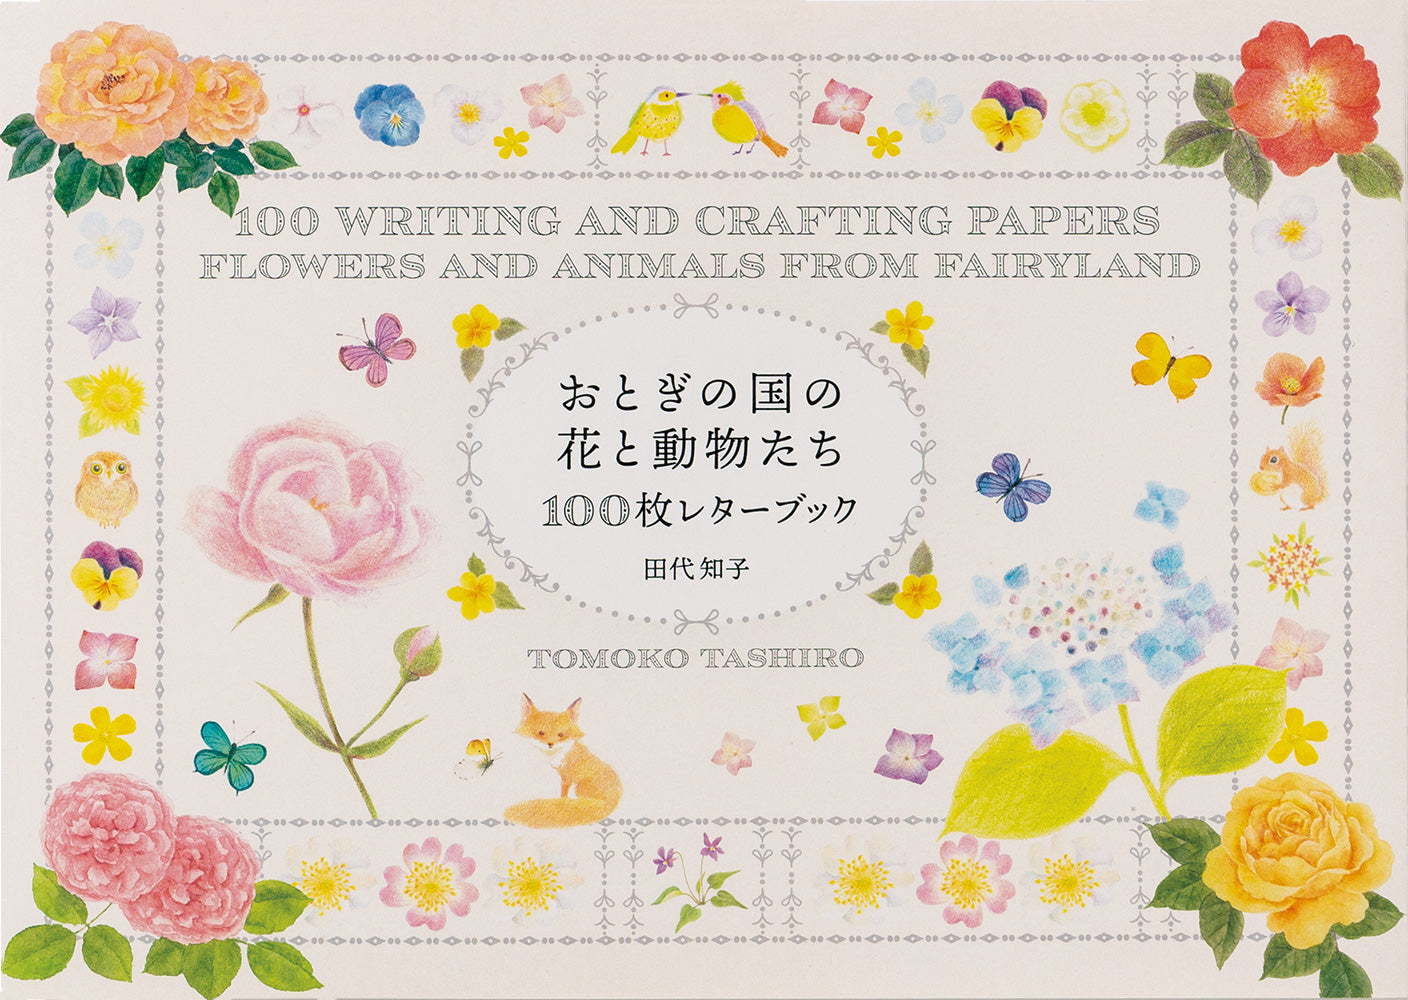 100 Writing and Crafting Papers: Flowers and Animals from Fairyland (Japanese only, mostly visual) cover